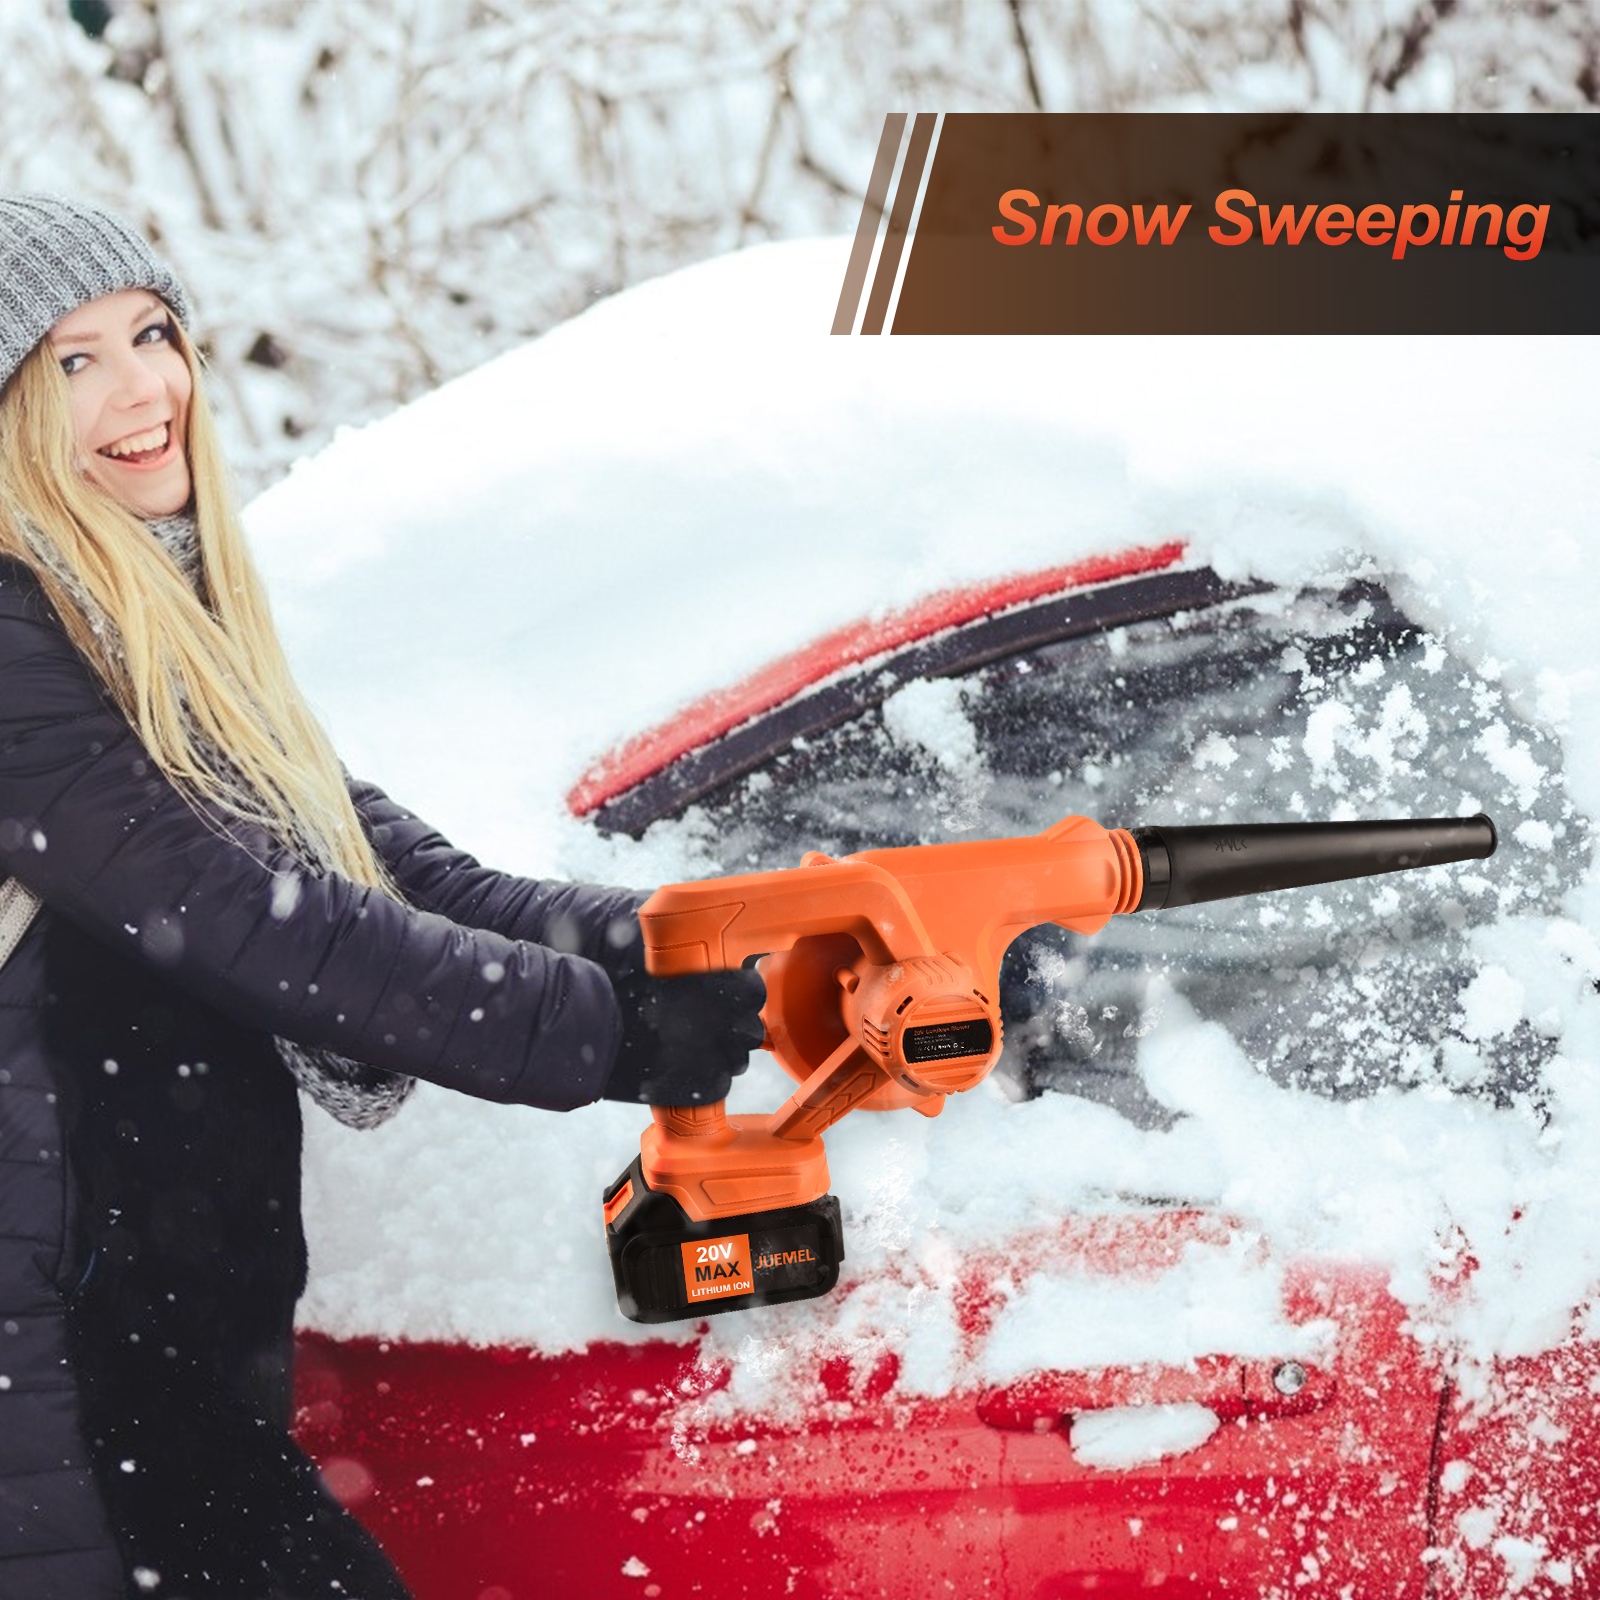 JUEMEL 20V Cordless Leaf Blower with 4.0 Ah Battery, 2 in 1 Sweeper/Vacuum Variable Speed Electric Leaf Blower for Blowing Leaf/Snow, Computer Host, Work Around The House